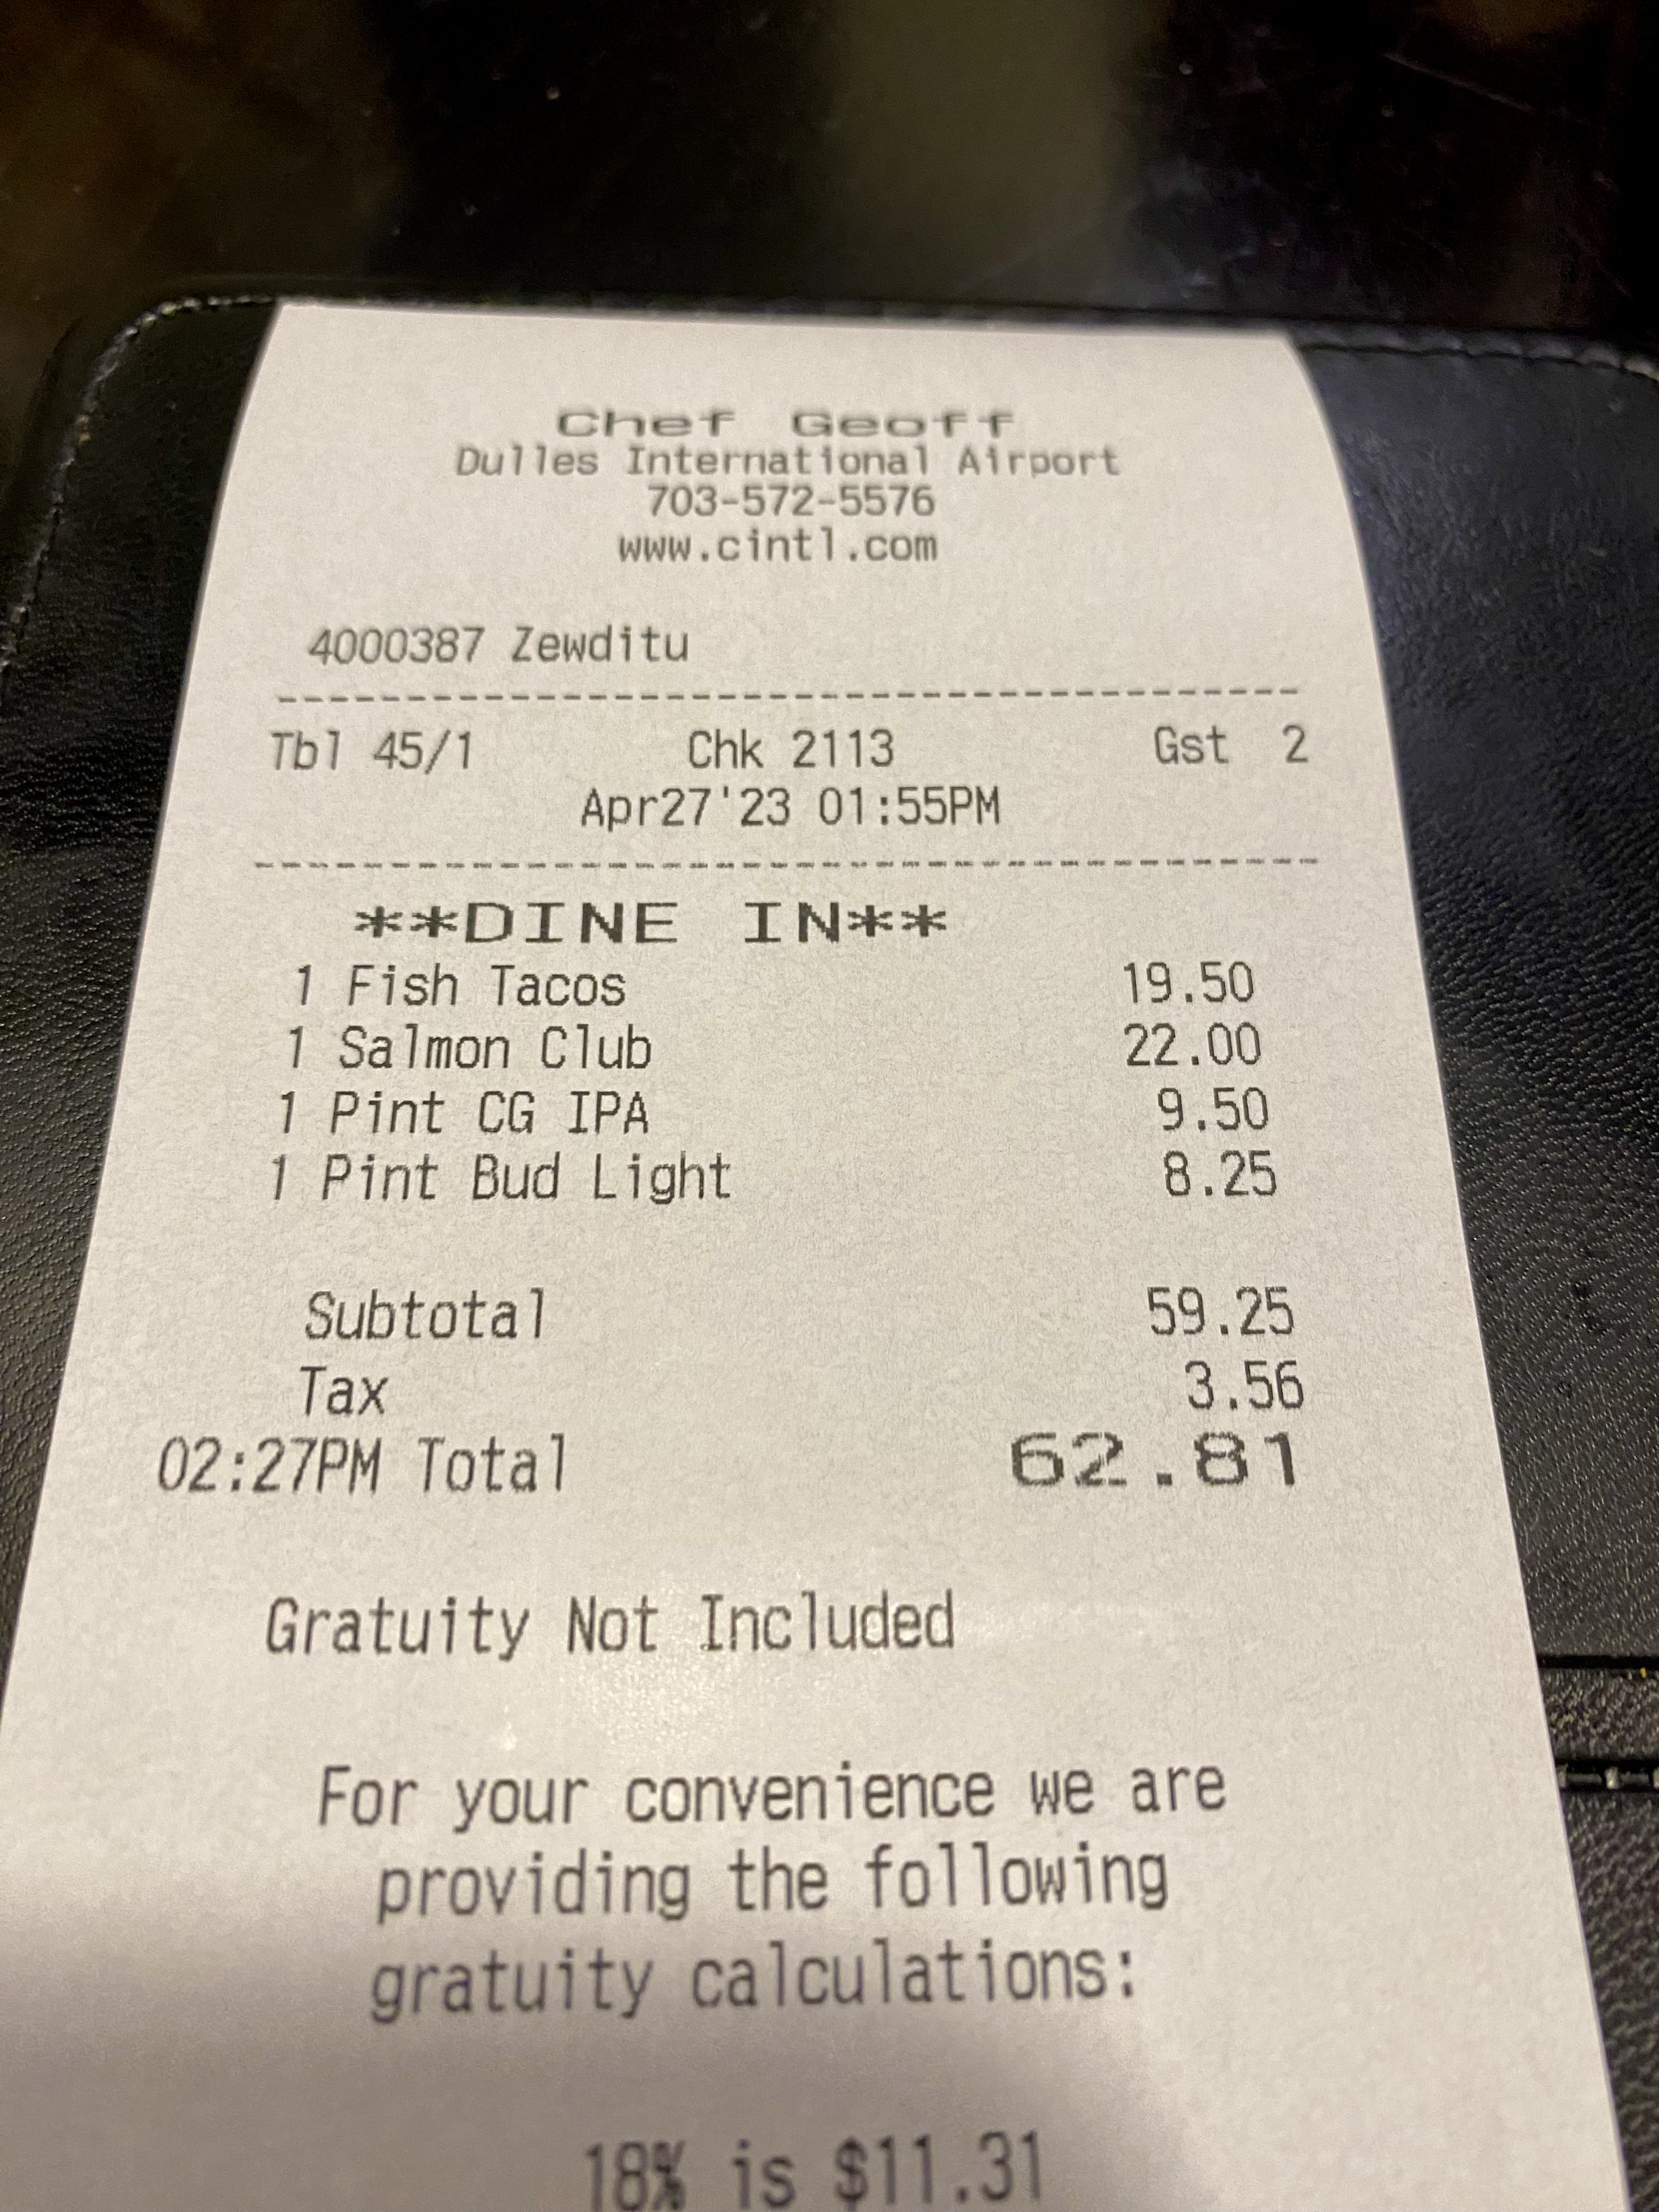 a receipt on a leather cover